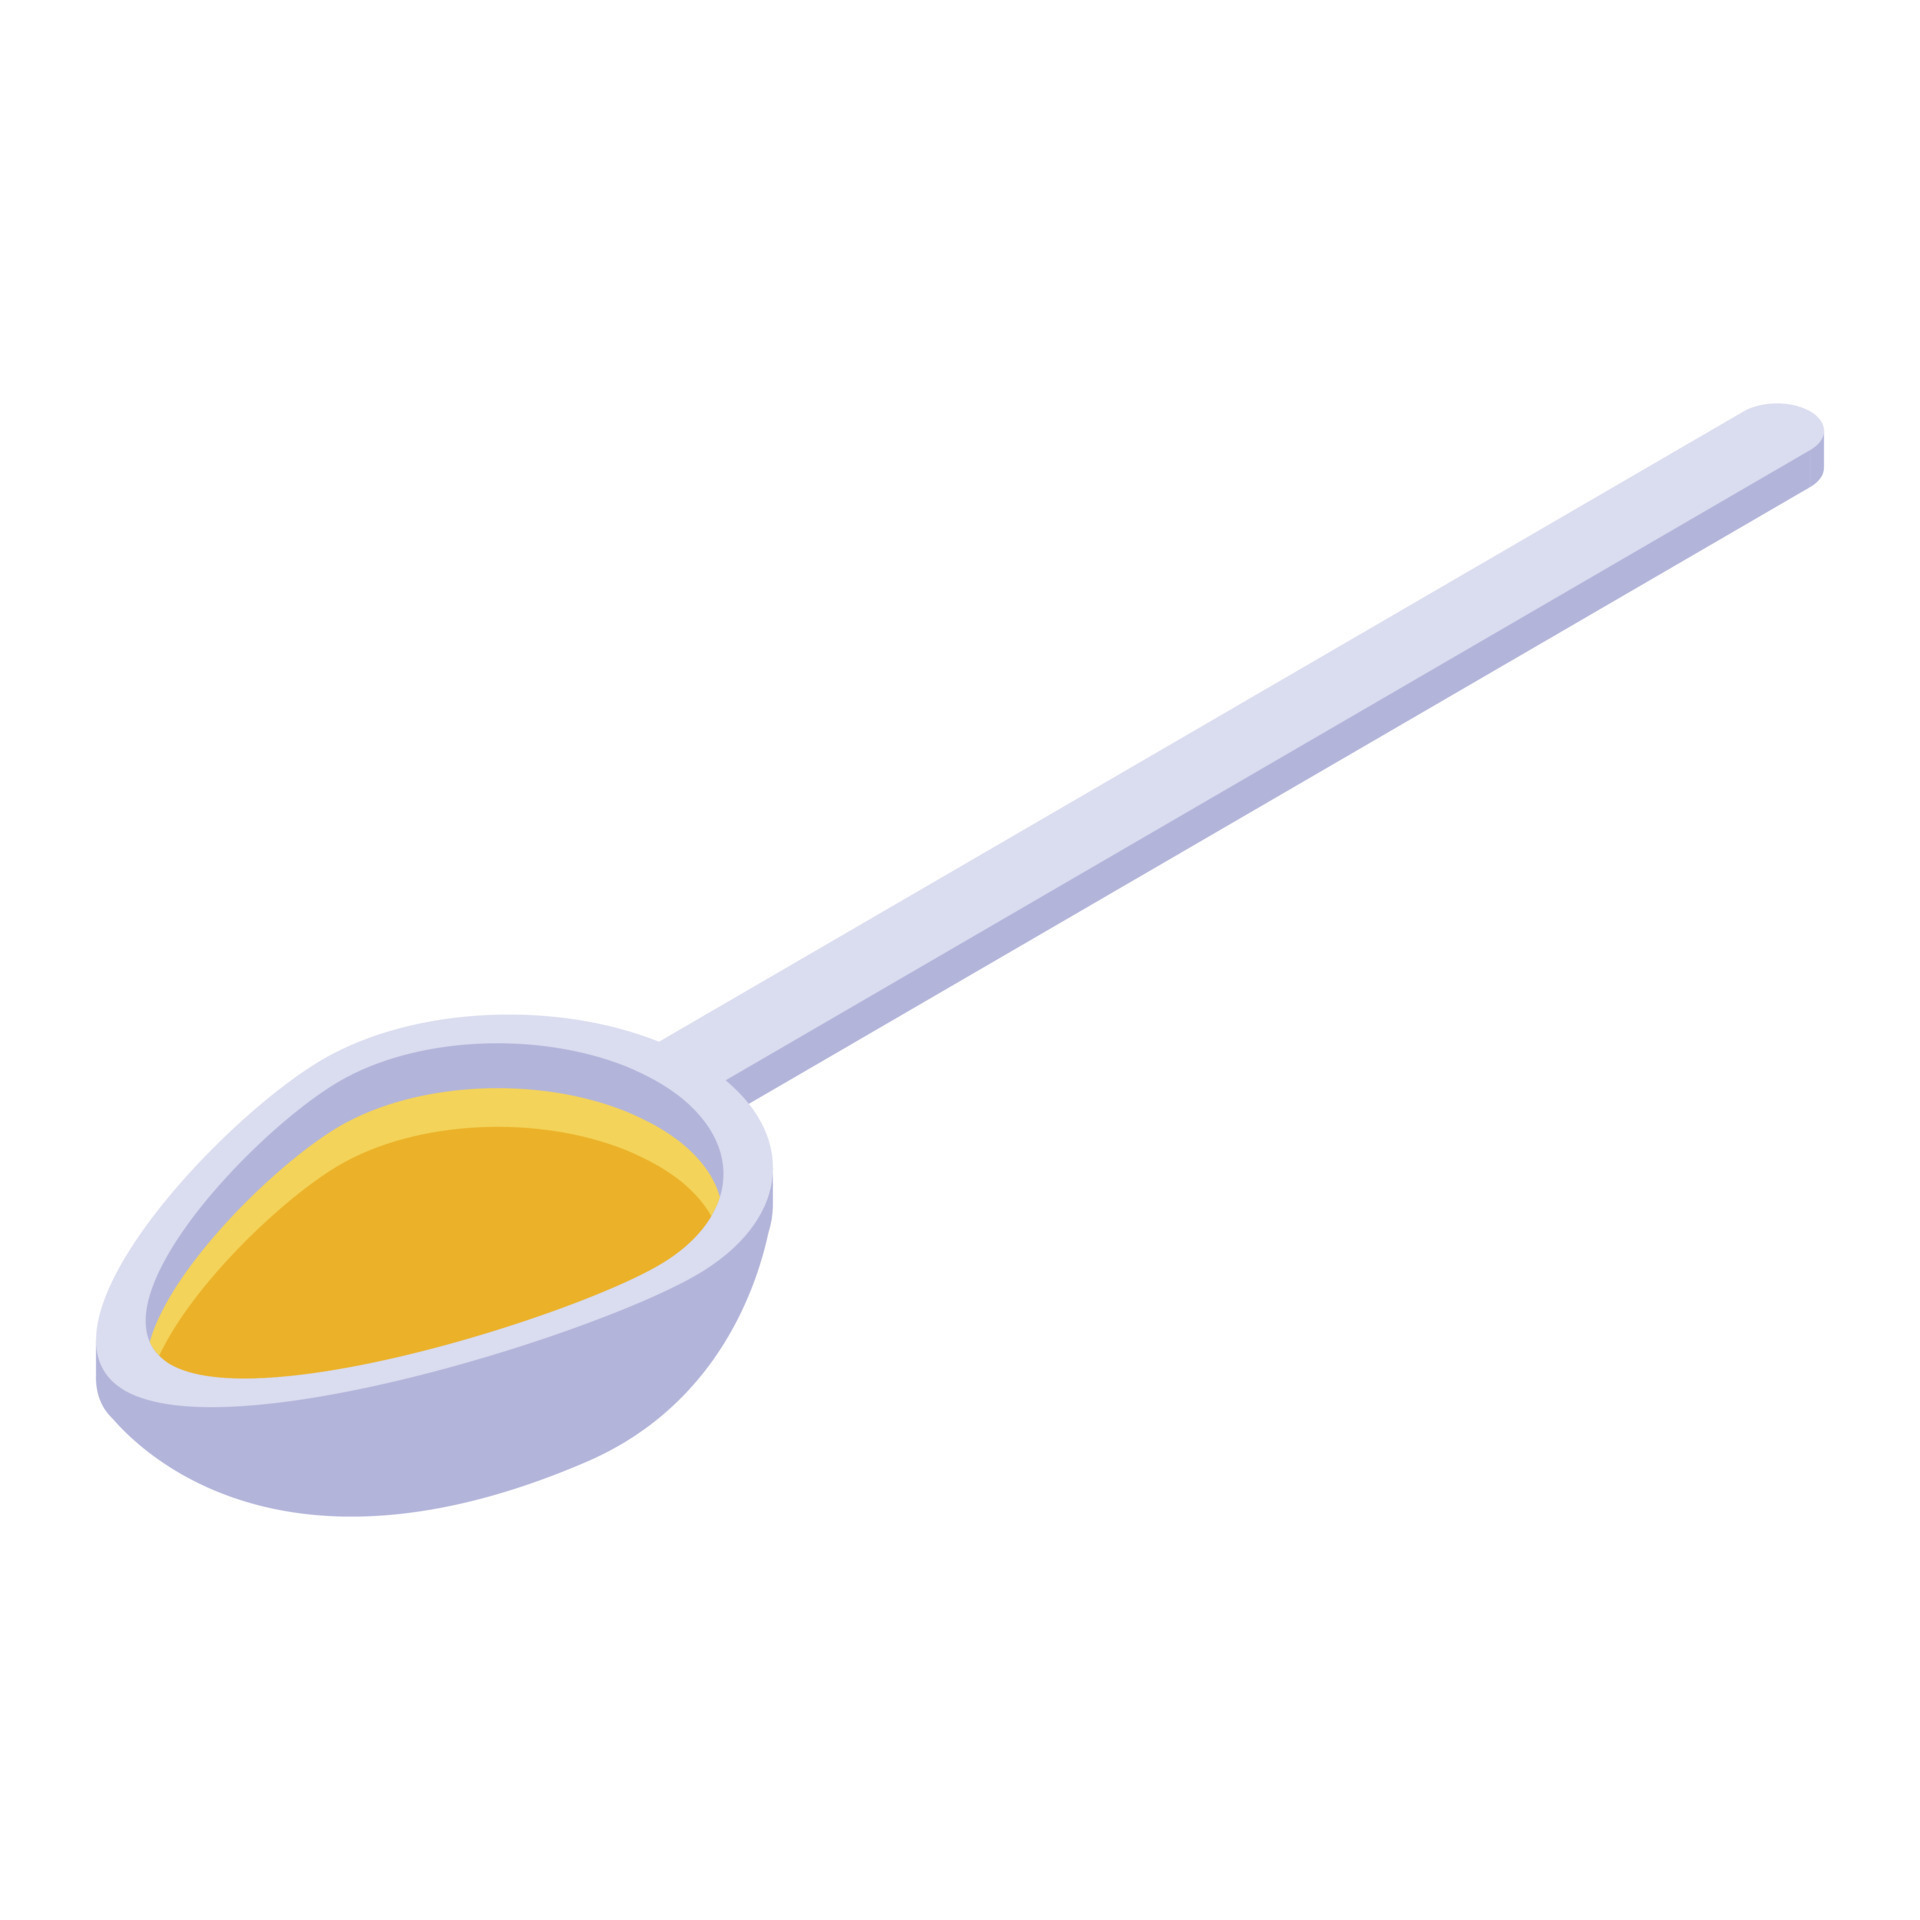 https://static.vecteezy.com/system/resources/previews/015/914/992/original/spoon-olive-oil-icon-isometric-style-vector.jpg